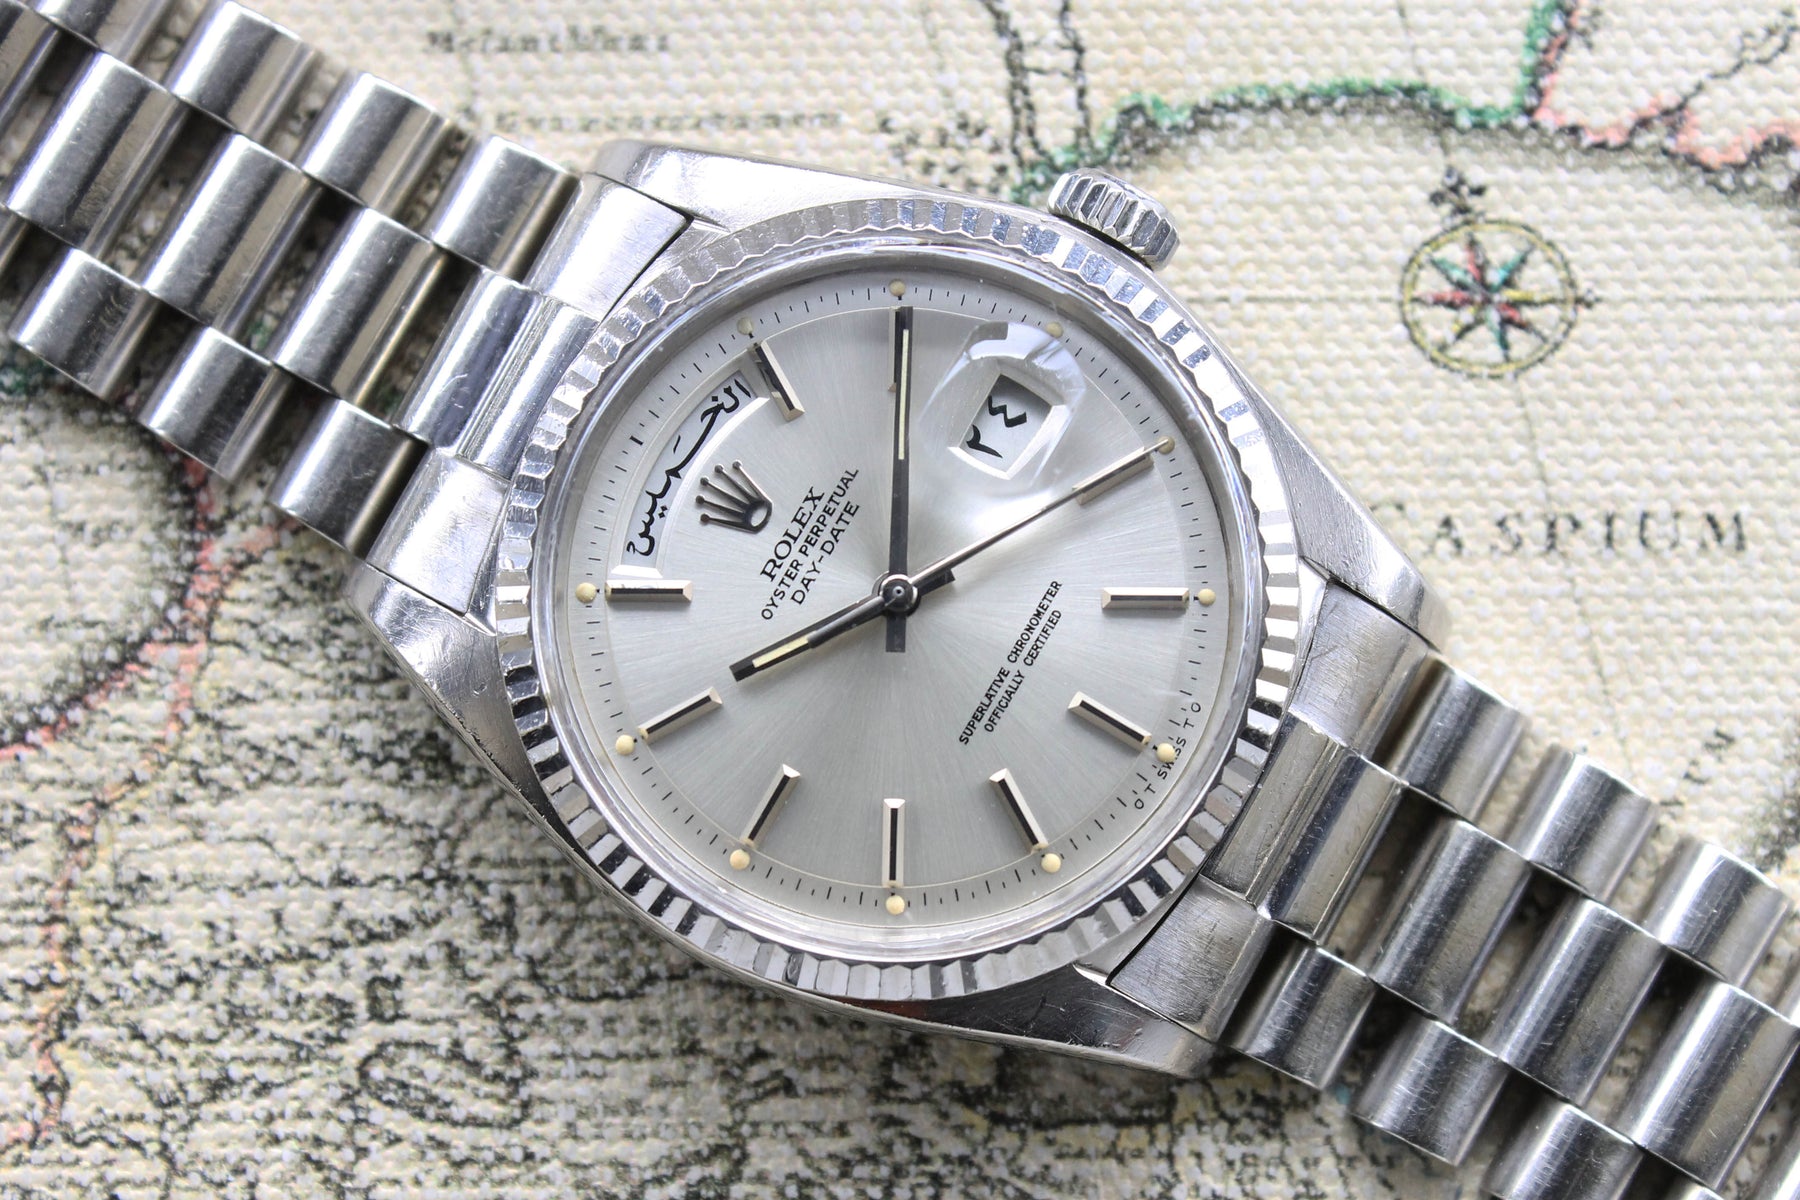 Rolex Day-Date in Yellow Gold ref 1803 Grey Dial 1971 on President